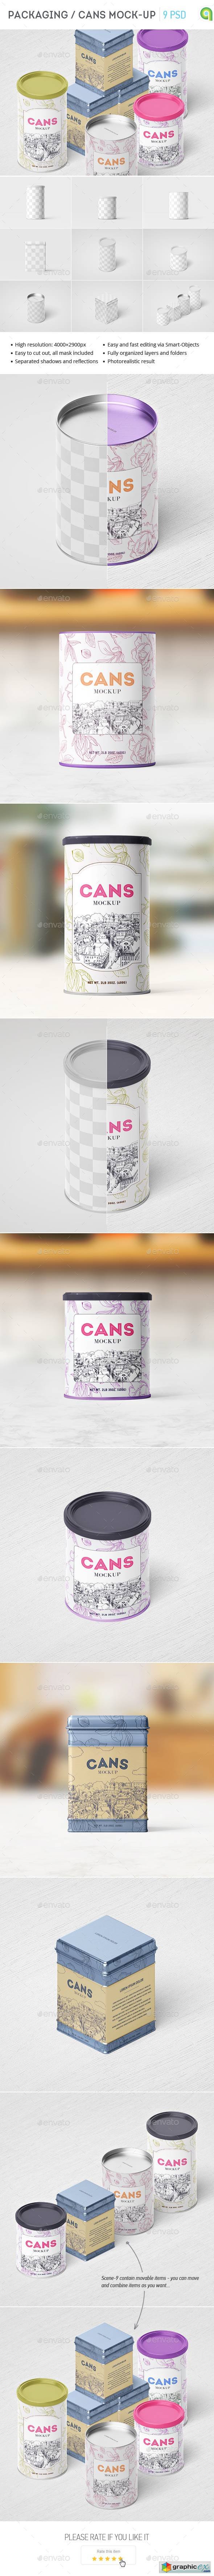 Packaging / Can Mockup